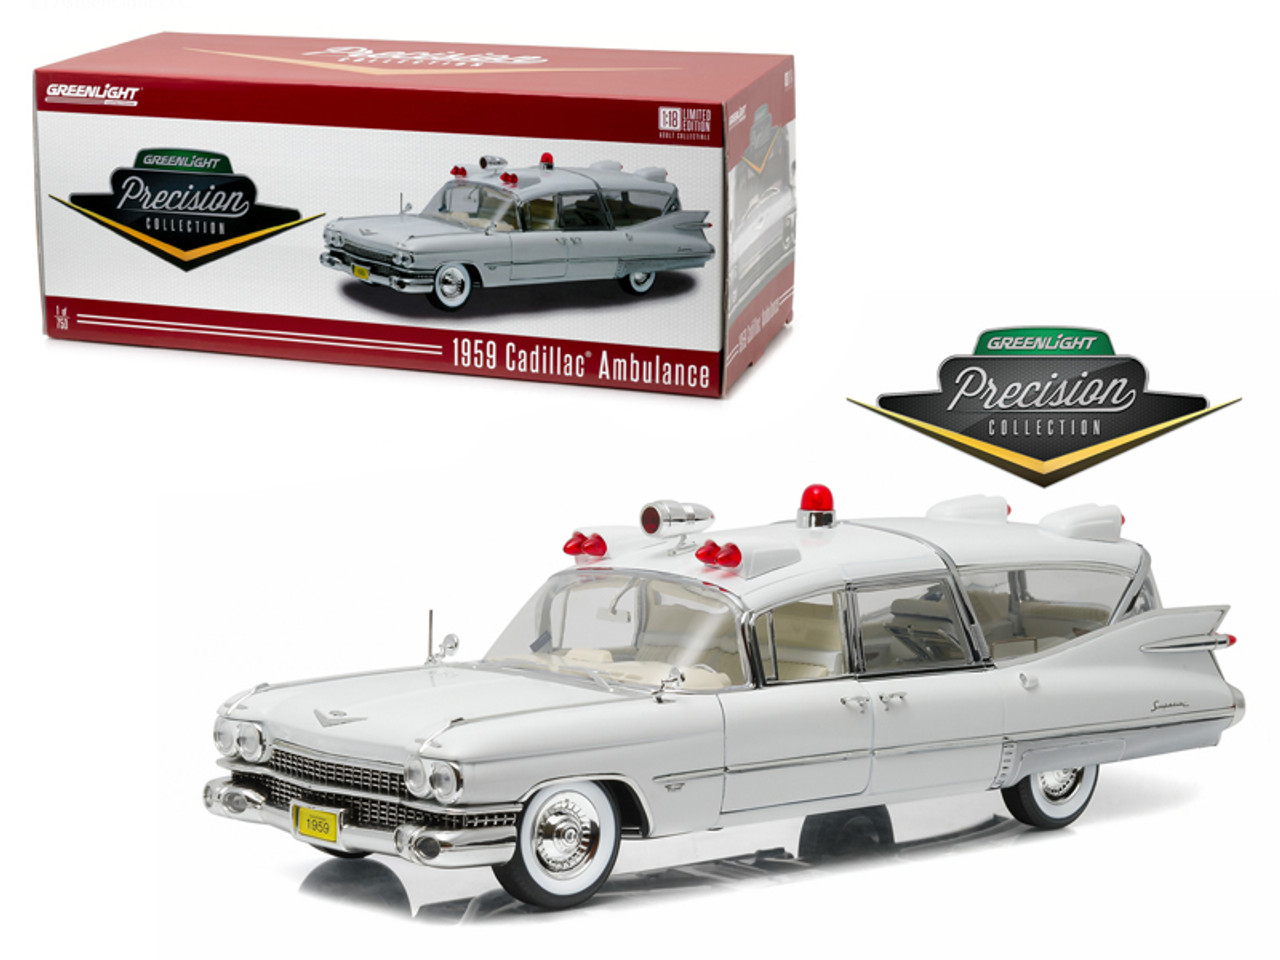 1/18 Greenlight 1959 Cadillac Ambulance White Precision Collection Limited Edition Diecast Car Model